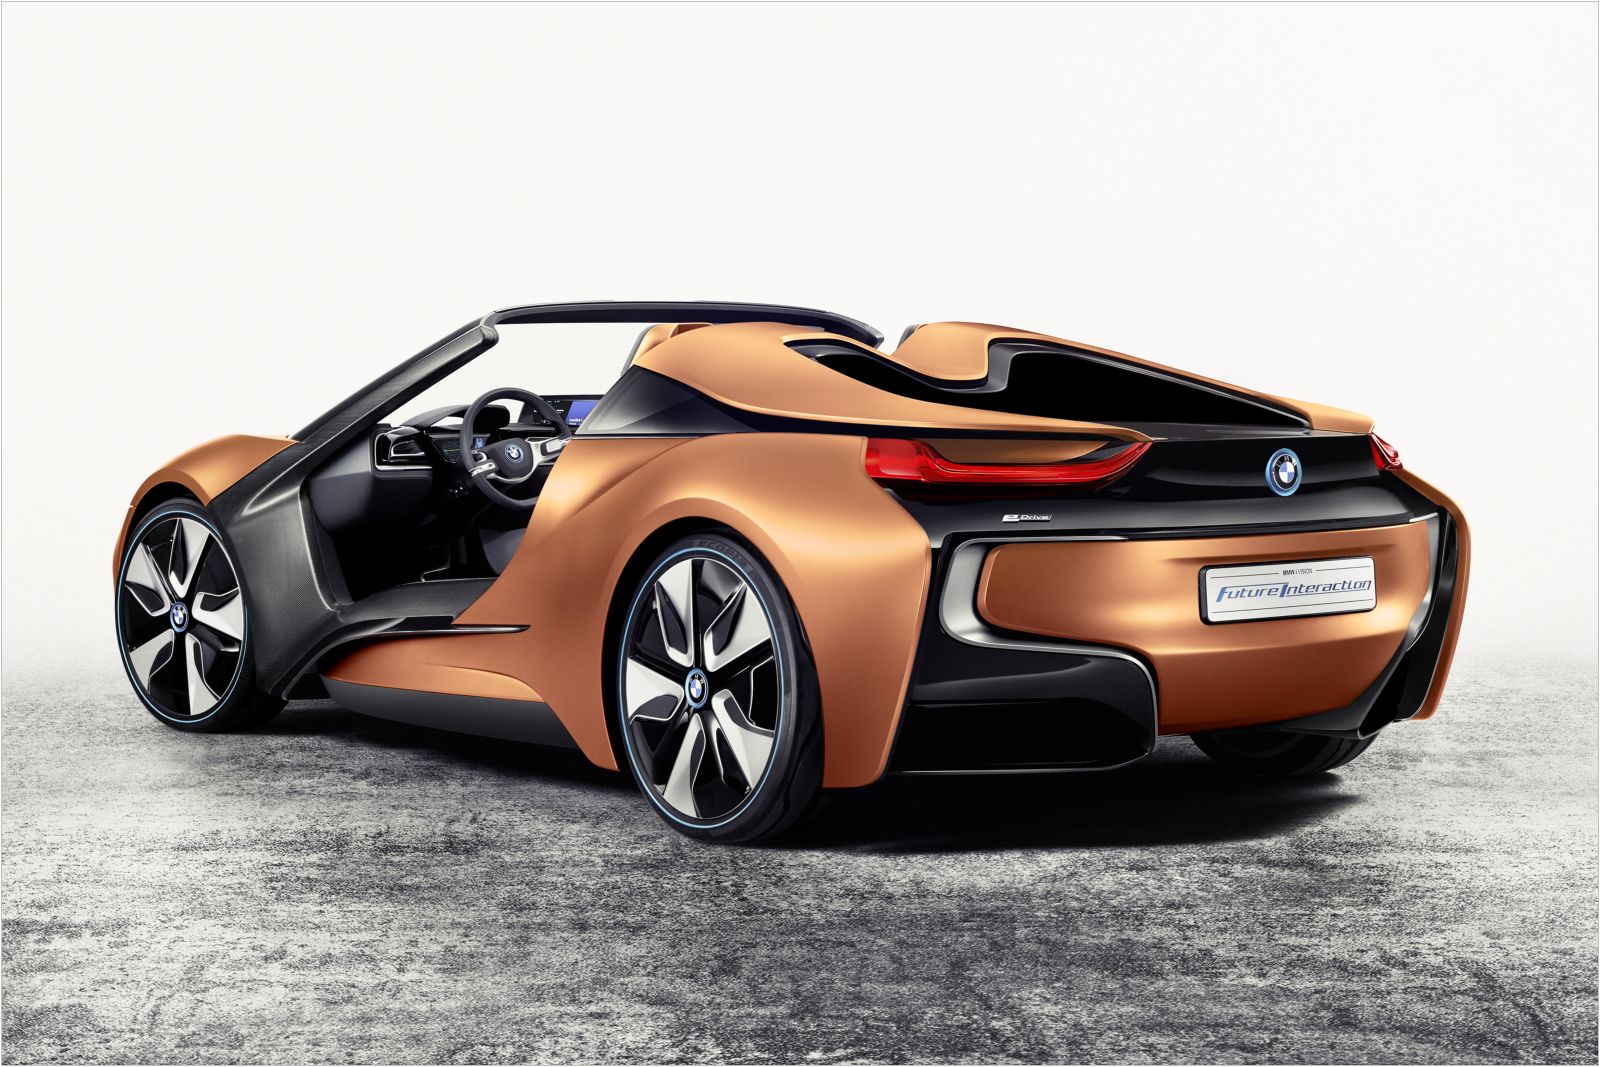 BMW i Vision Future Interaction Concept, 1600x1067px, img-2